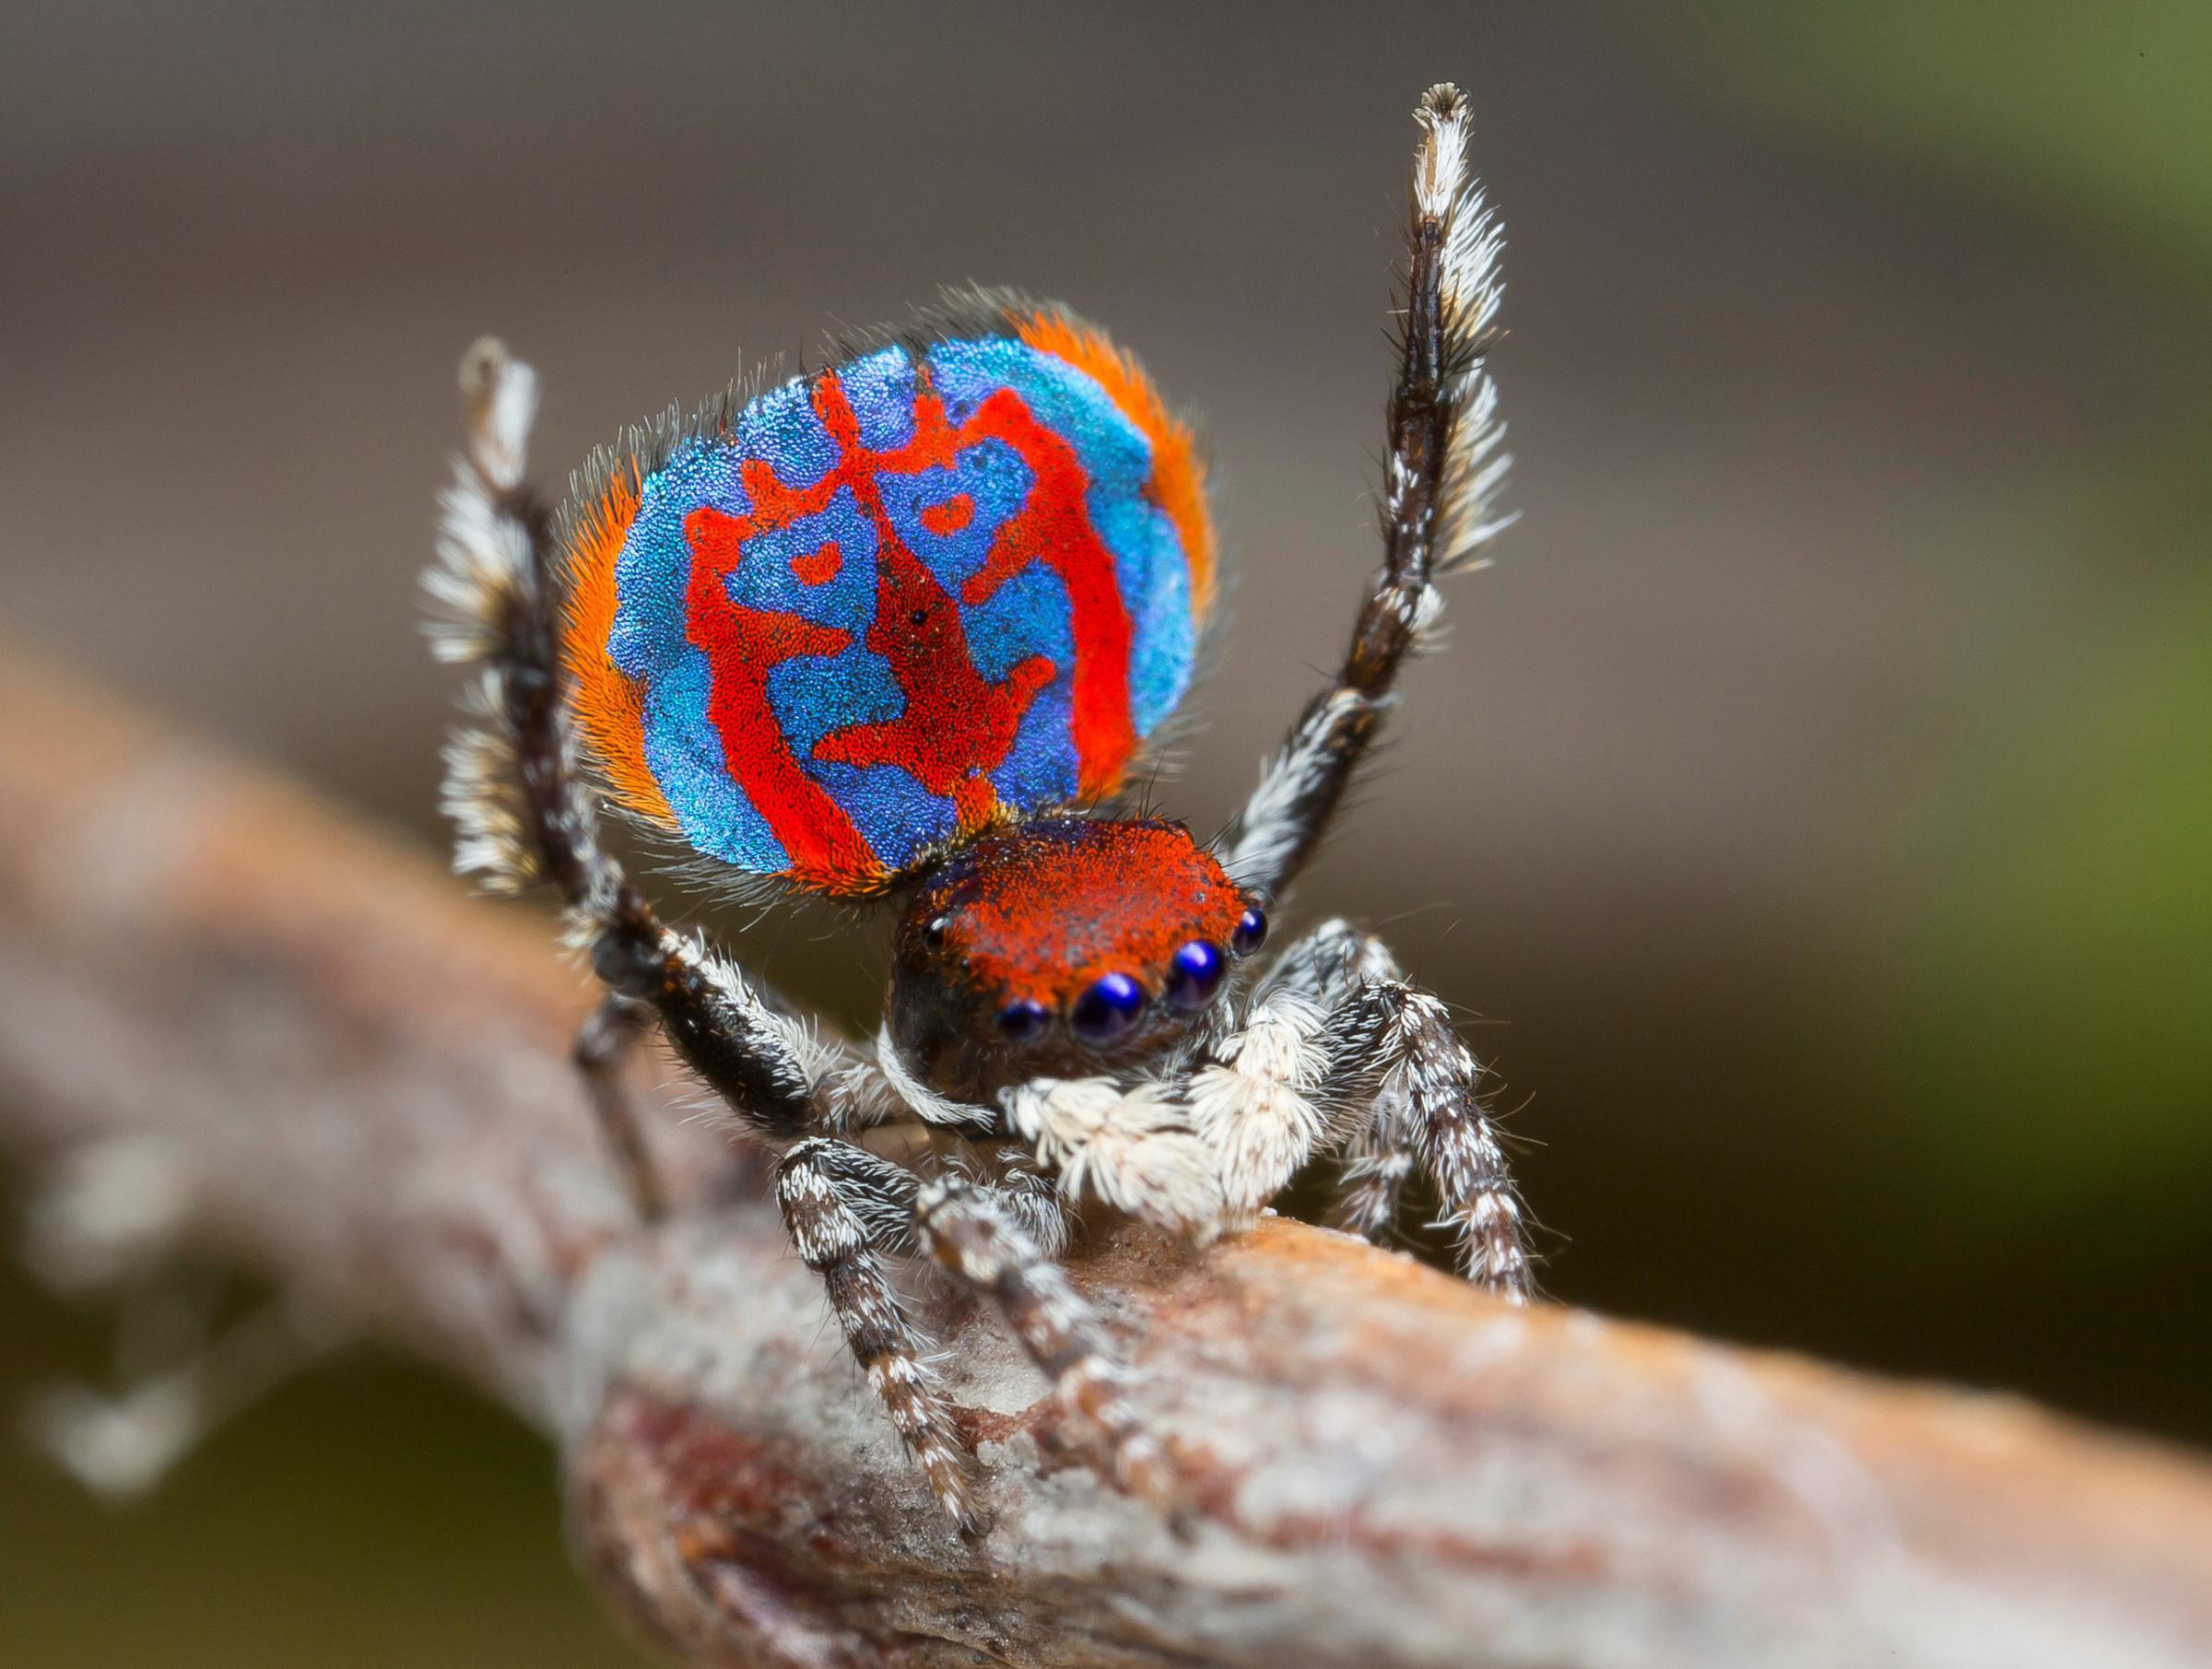 A specimen of the newly-discovered Australian Peacock spider, Maratus Bubo, shows off his colourful abdomen. Bubo, is the genus name for horned owls, a reference to the owl-like pattern on this spider's abdomen.